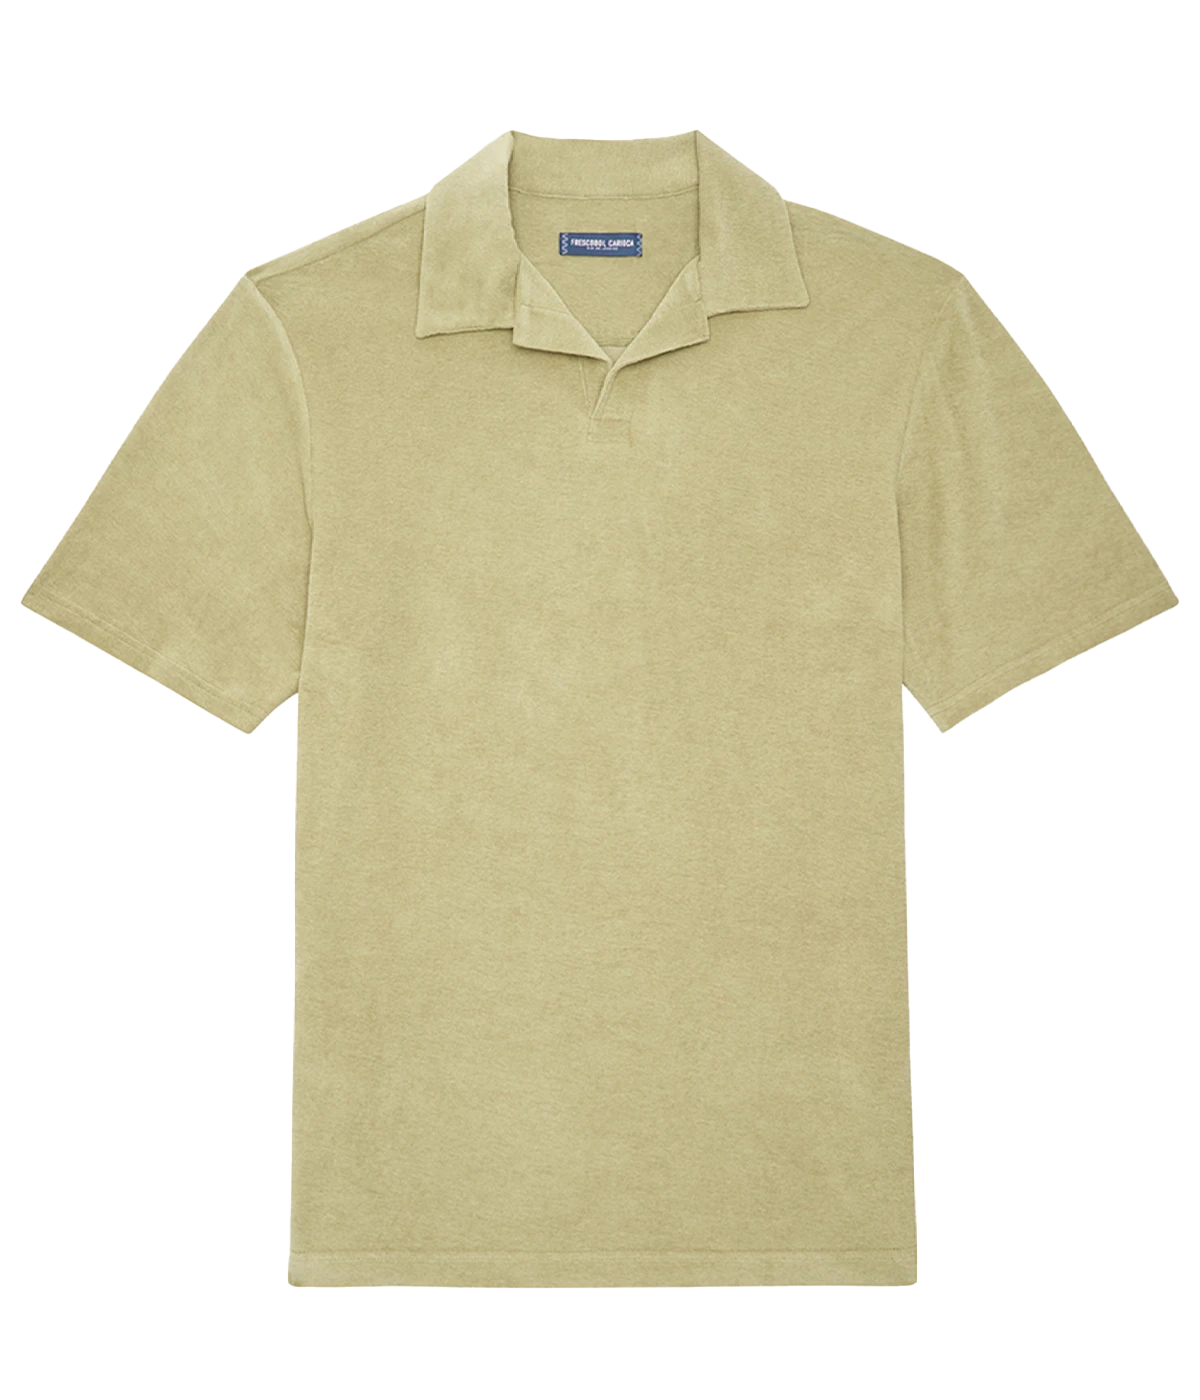 Faustino Terry Cotton Blend Short Sleeve Polo in Jungle Green